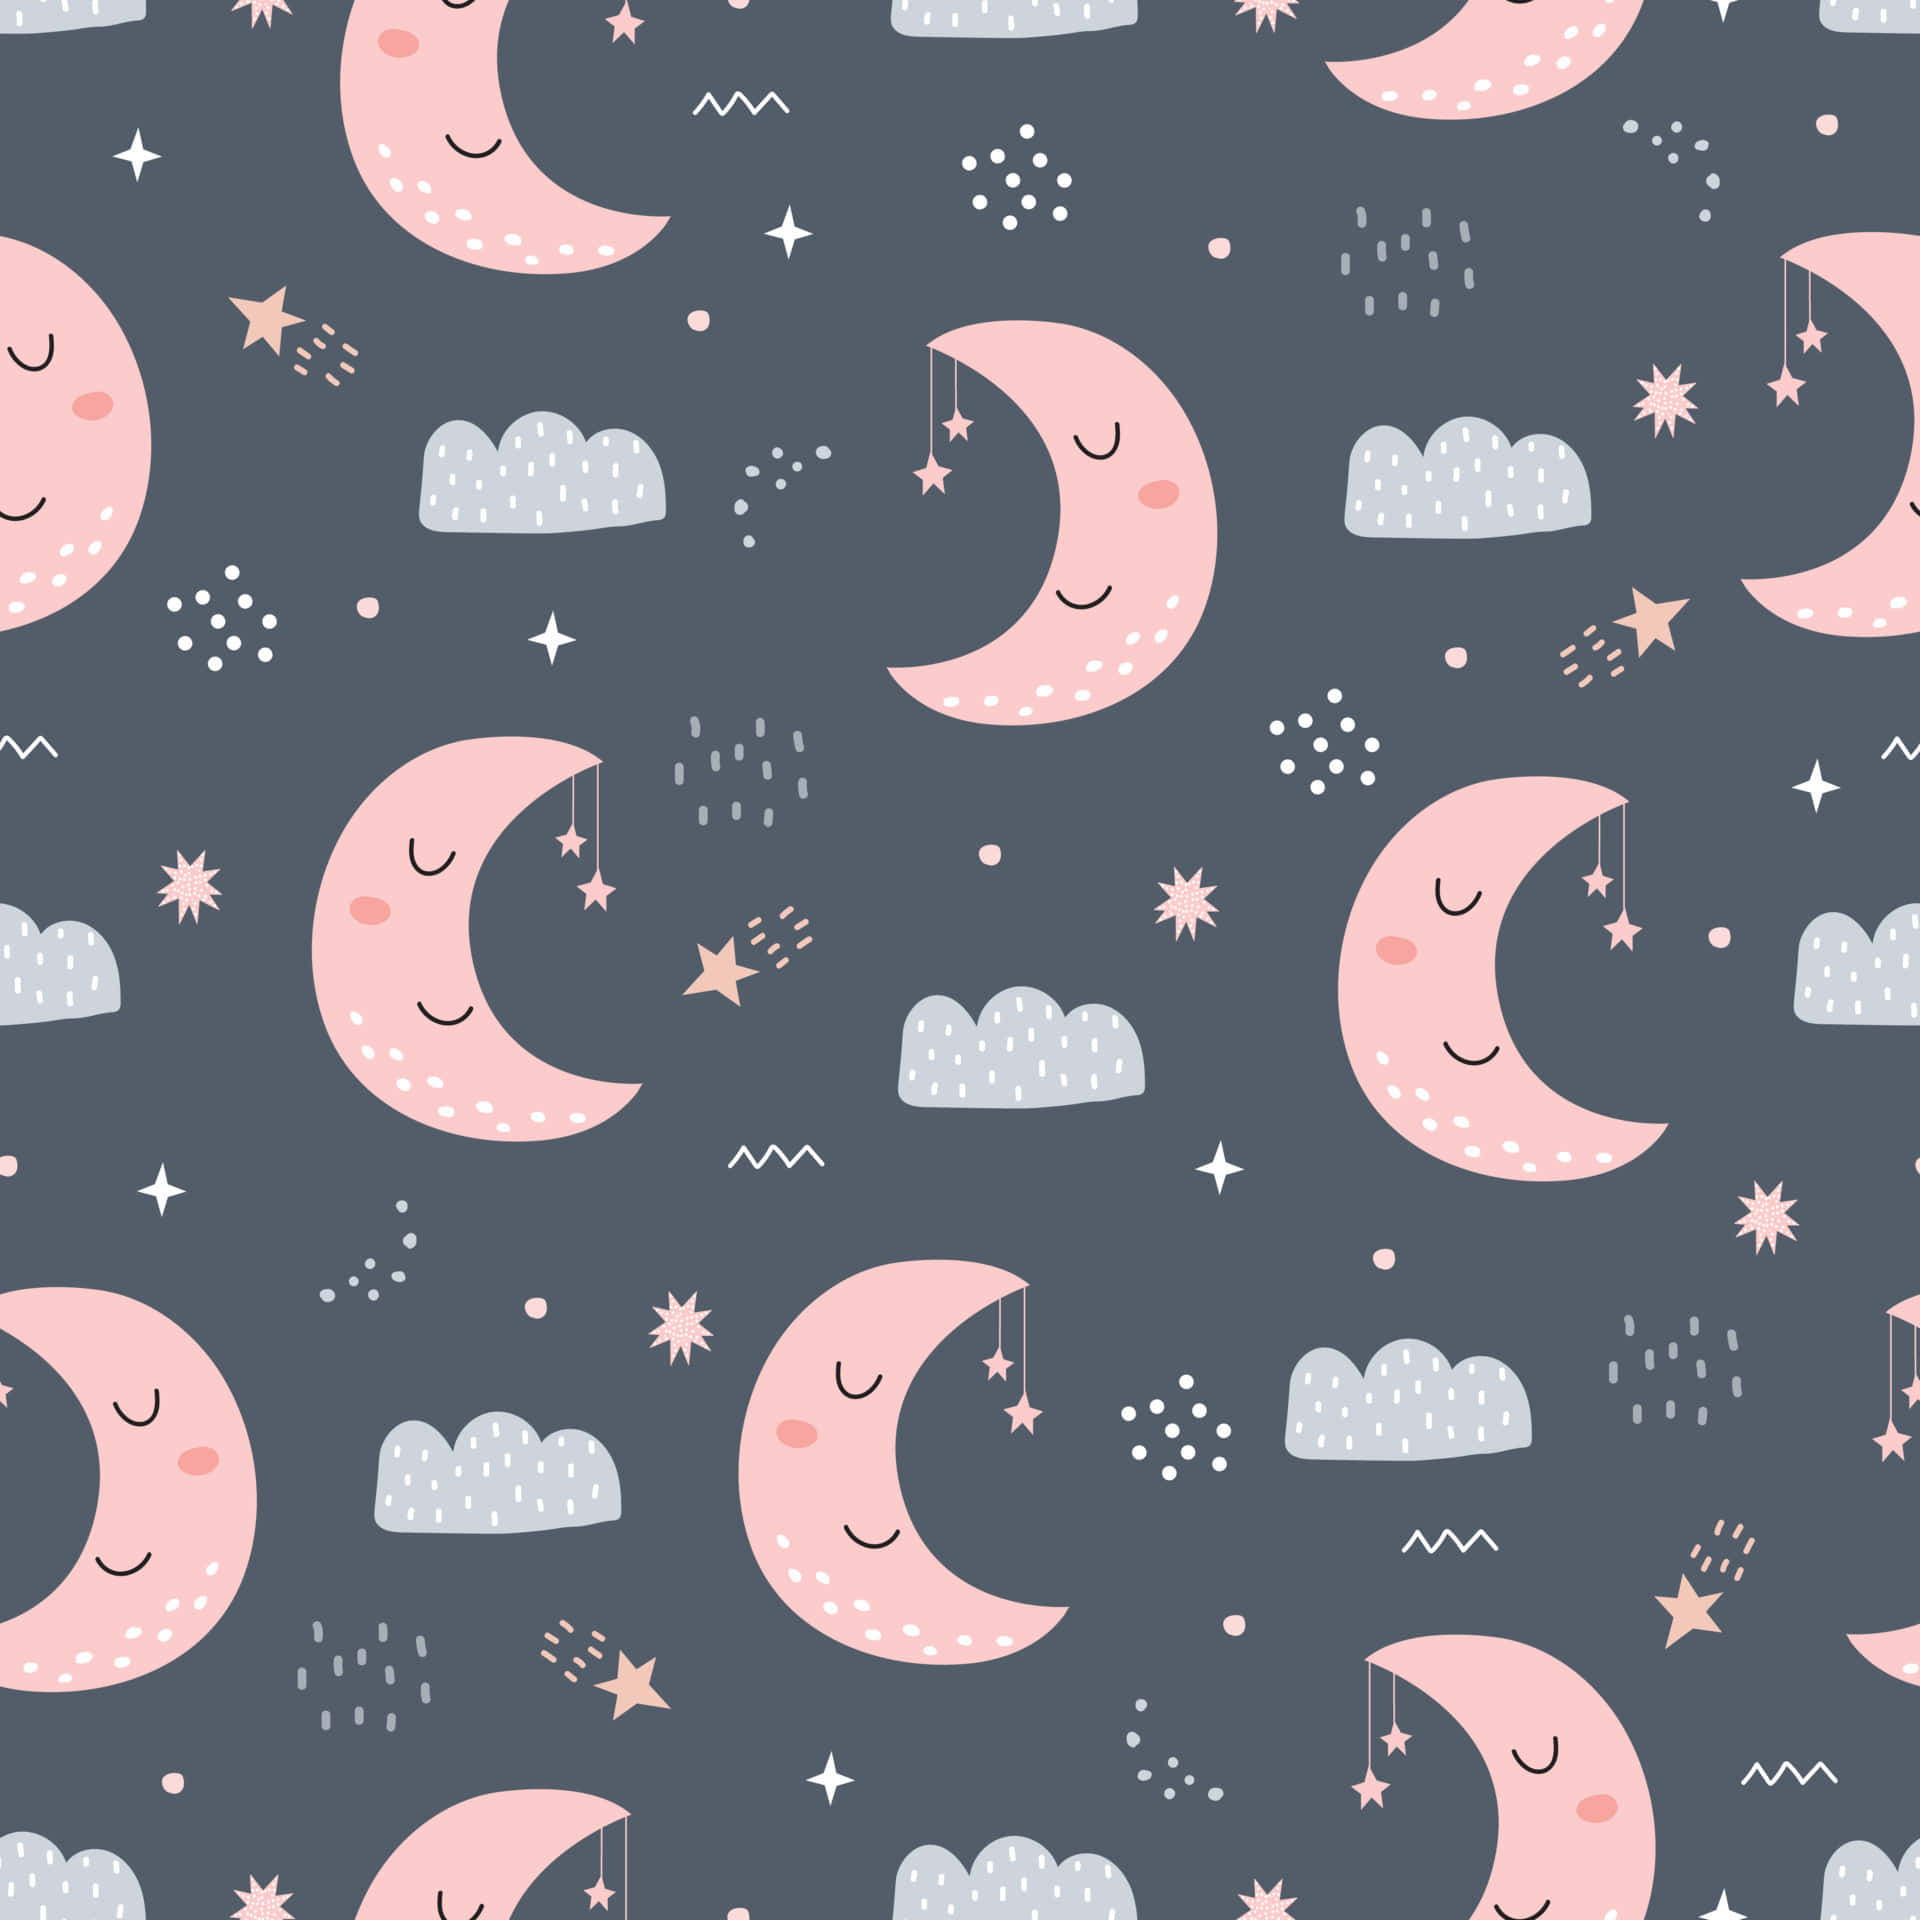 Embrace the beauty of the night sky with a cute moon Wallpaper